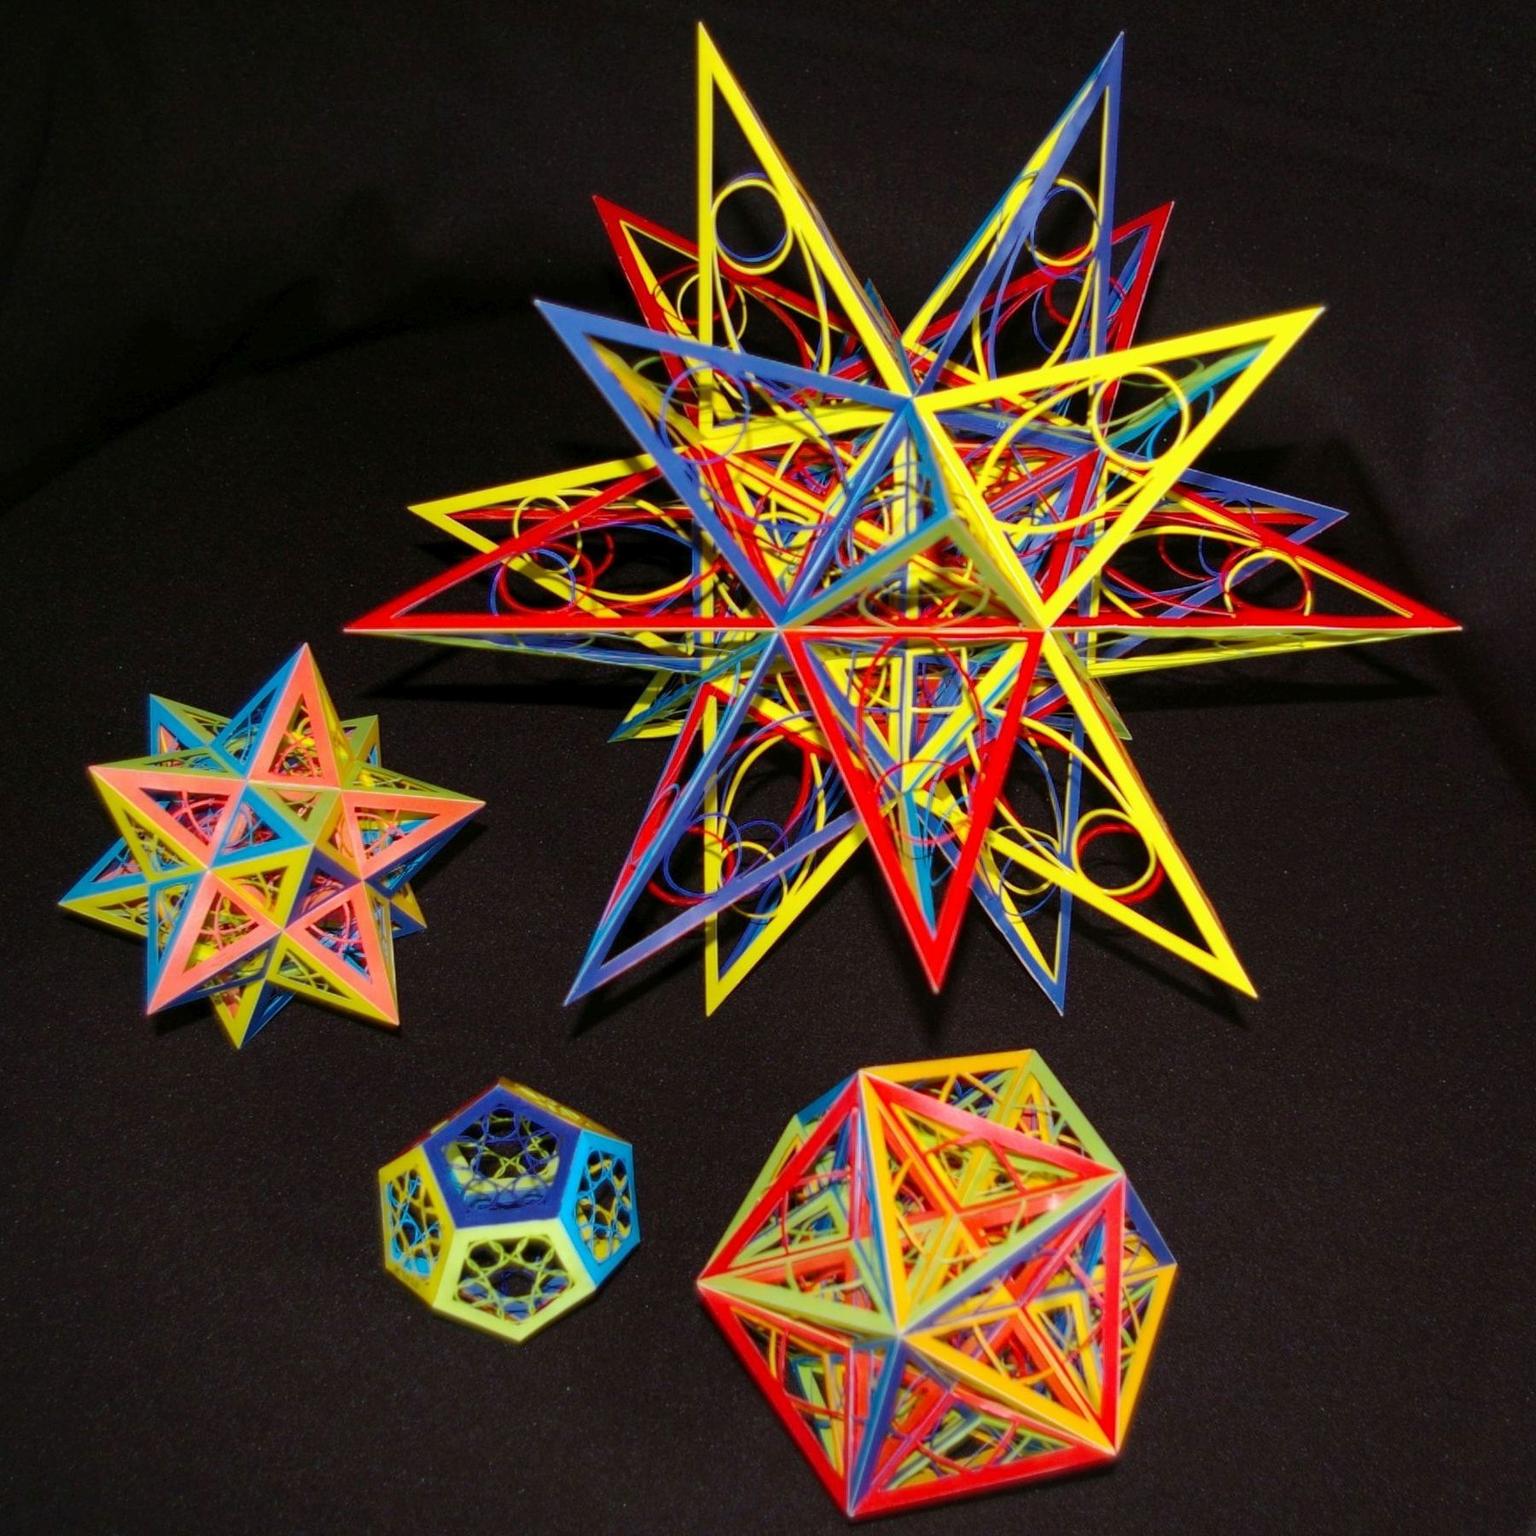 Image for entry 'Four Dodecahedra'